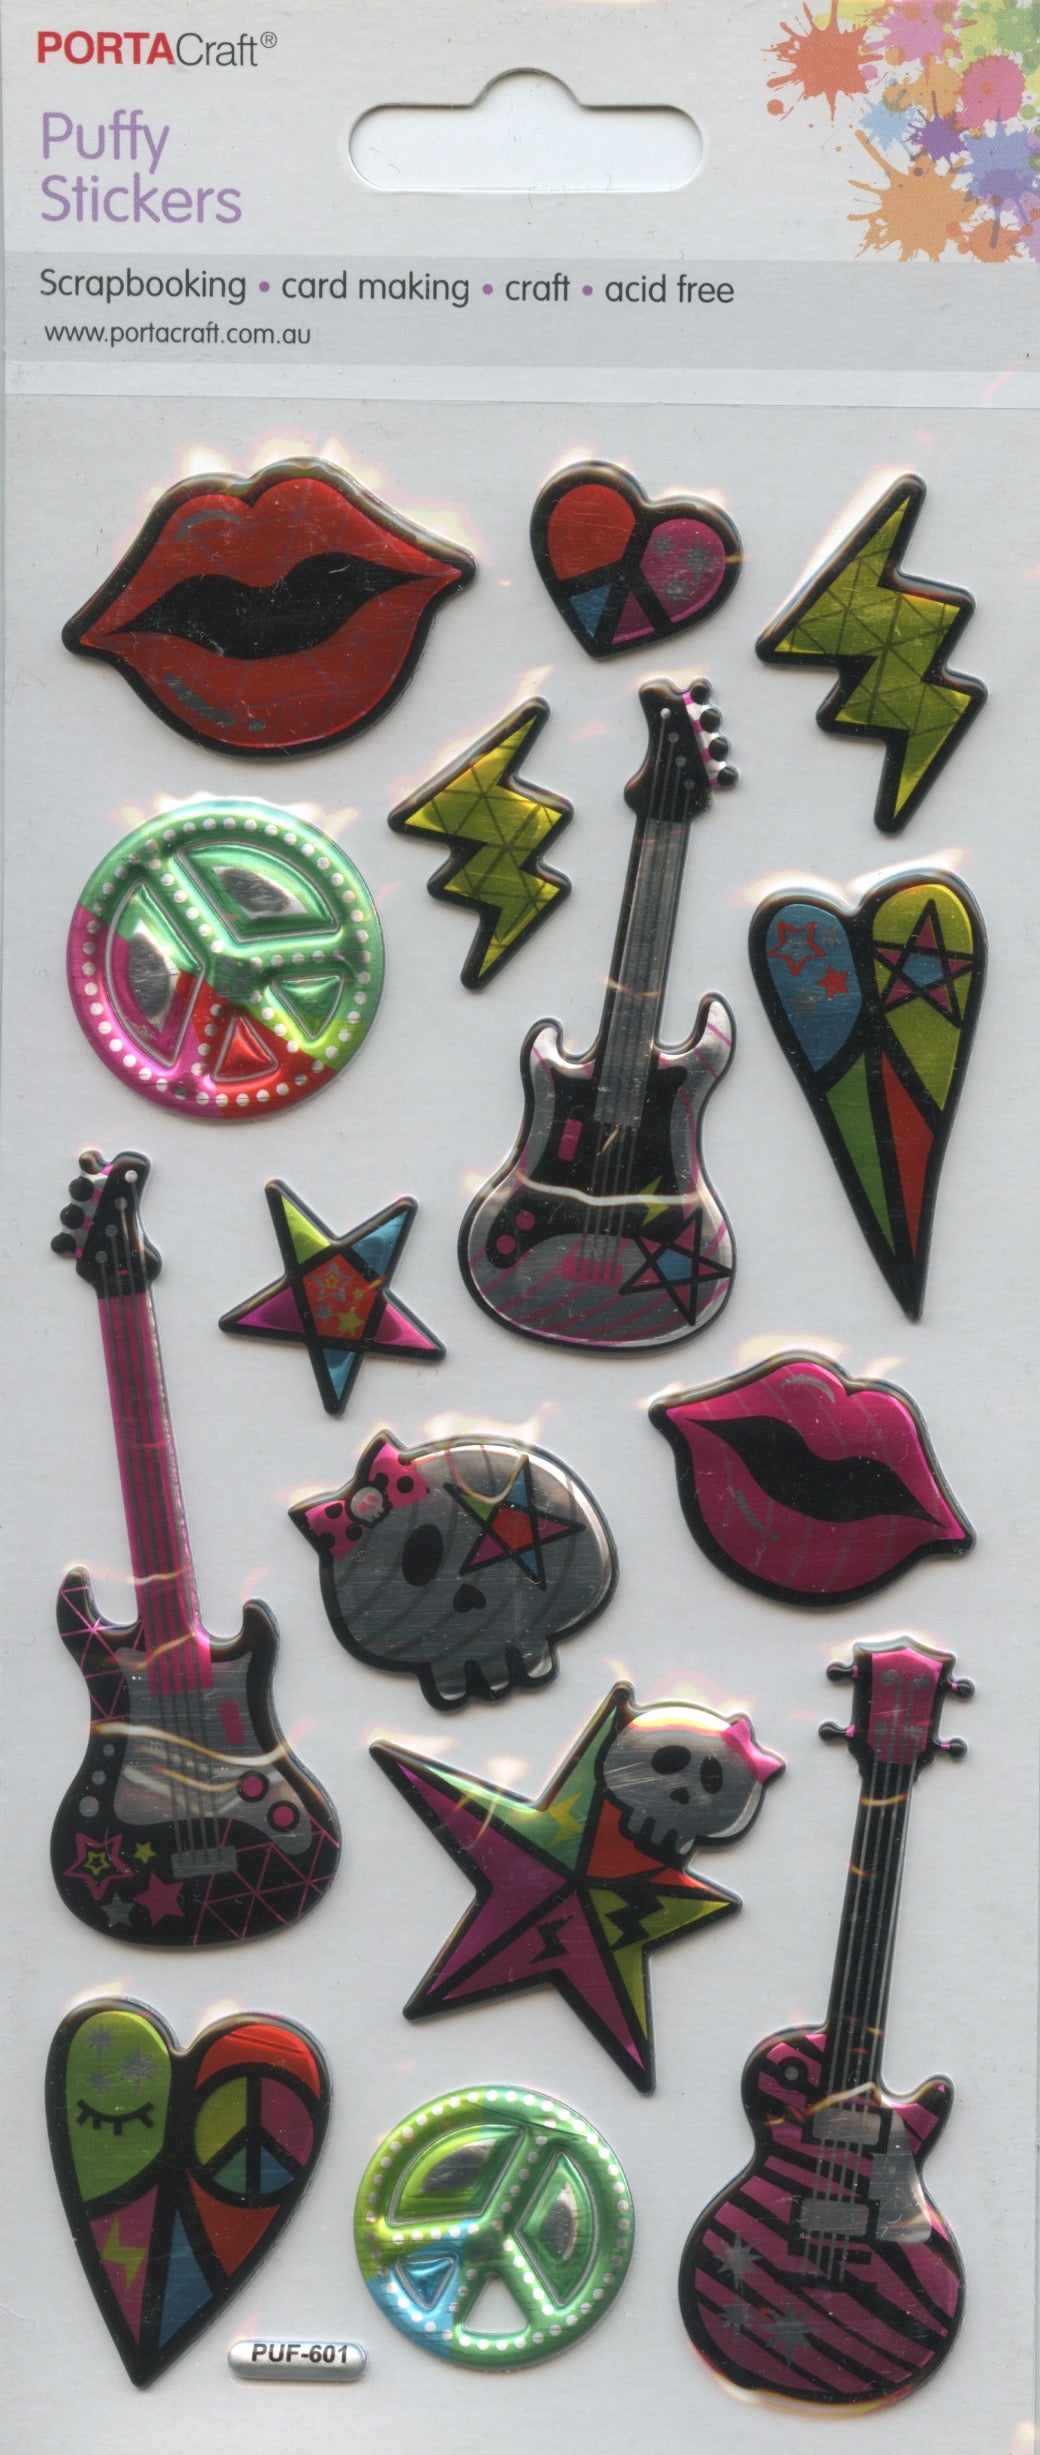 Puffy Stickers - Rockstar Theme - 15 pack